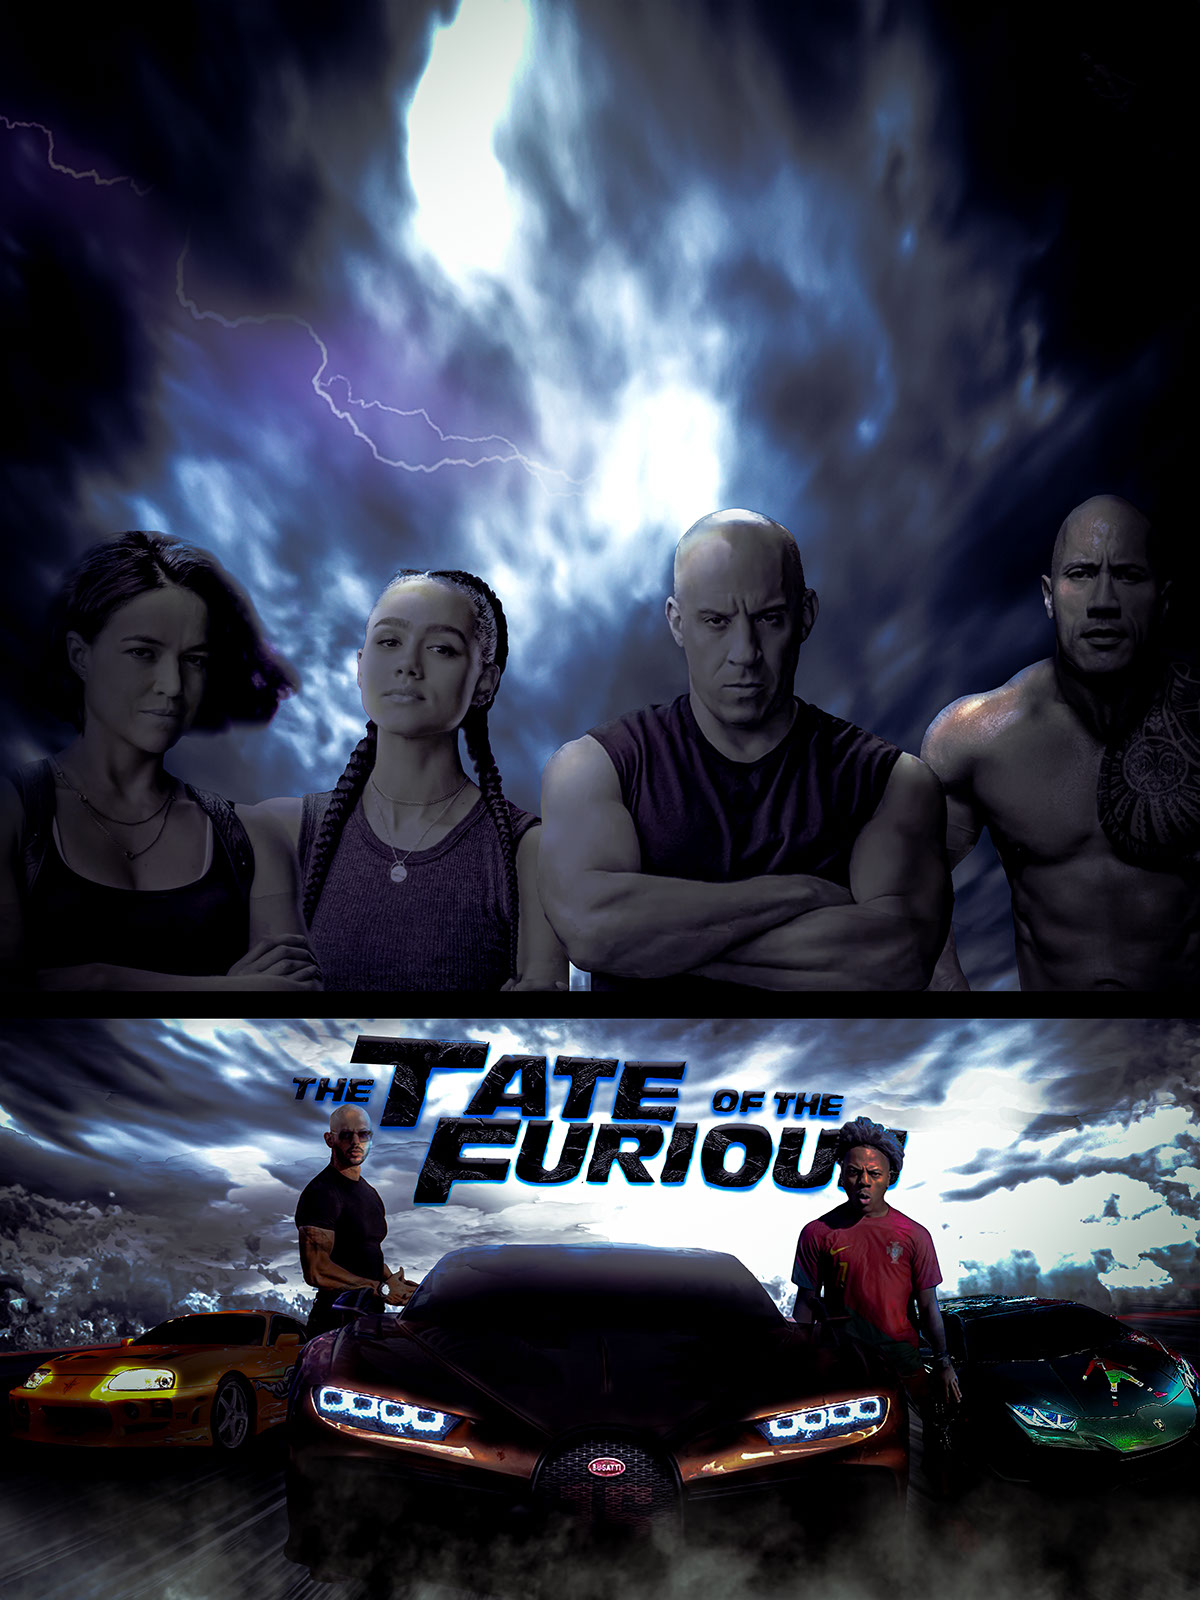 The Tate of the Furious rendition image